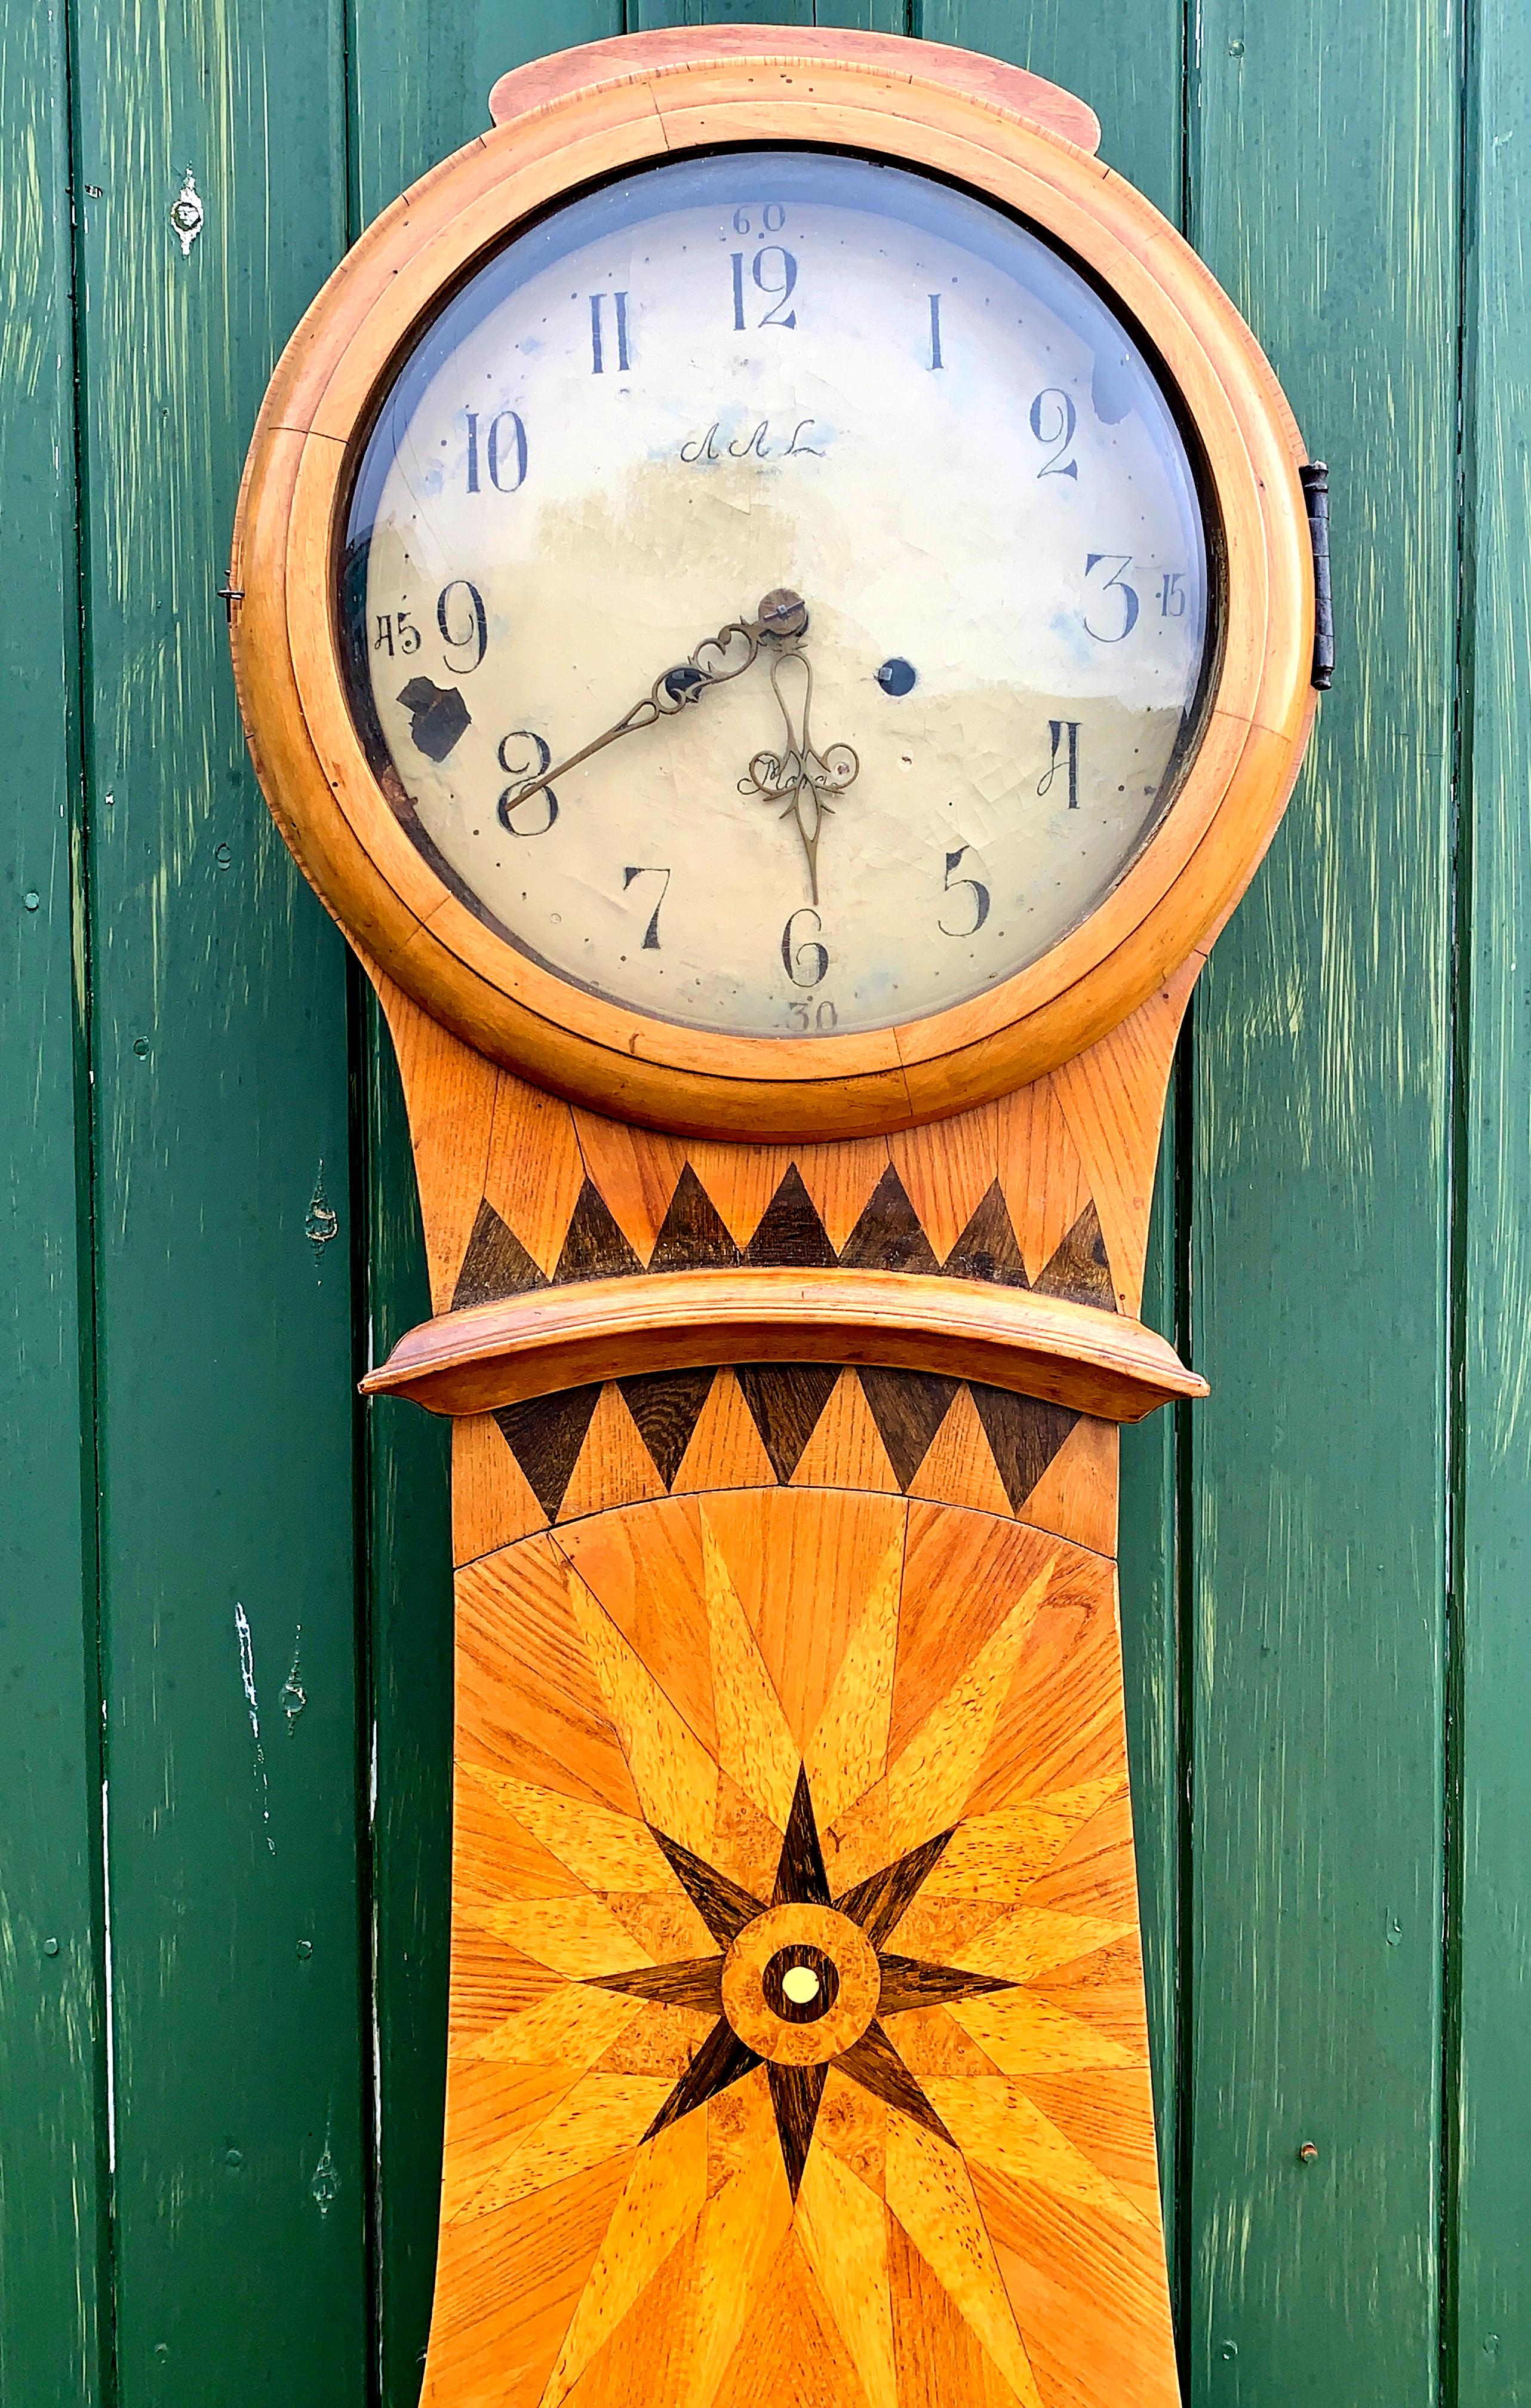 Rare Antique Swedish mora clock from mid 1800s in natural finish with exceptional marquetry pattern inlaid detailing and star motif with a great waisted shape body and a good face with lots of detail. Measures: 210cm.

It has the Classic extended